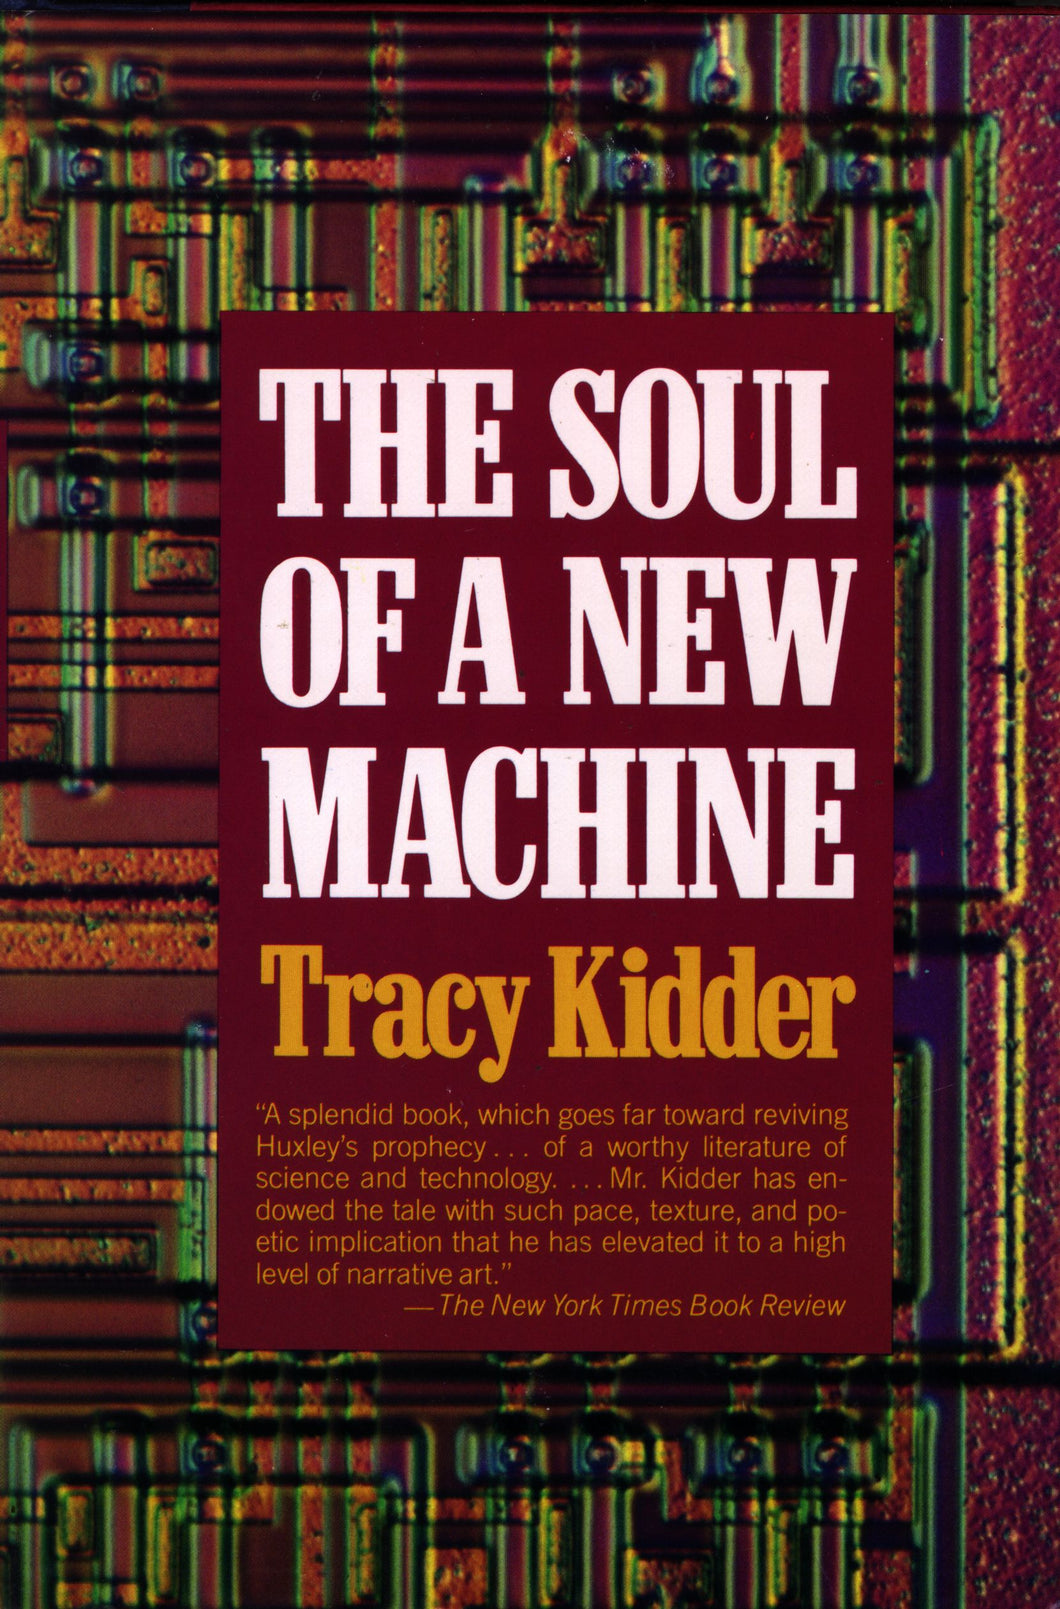 THE SOUL OF A NEW MACHINE